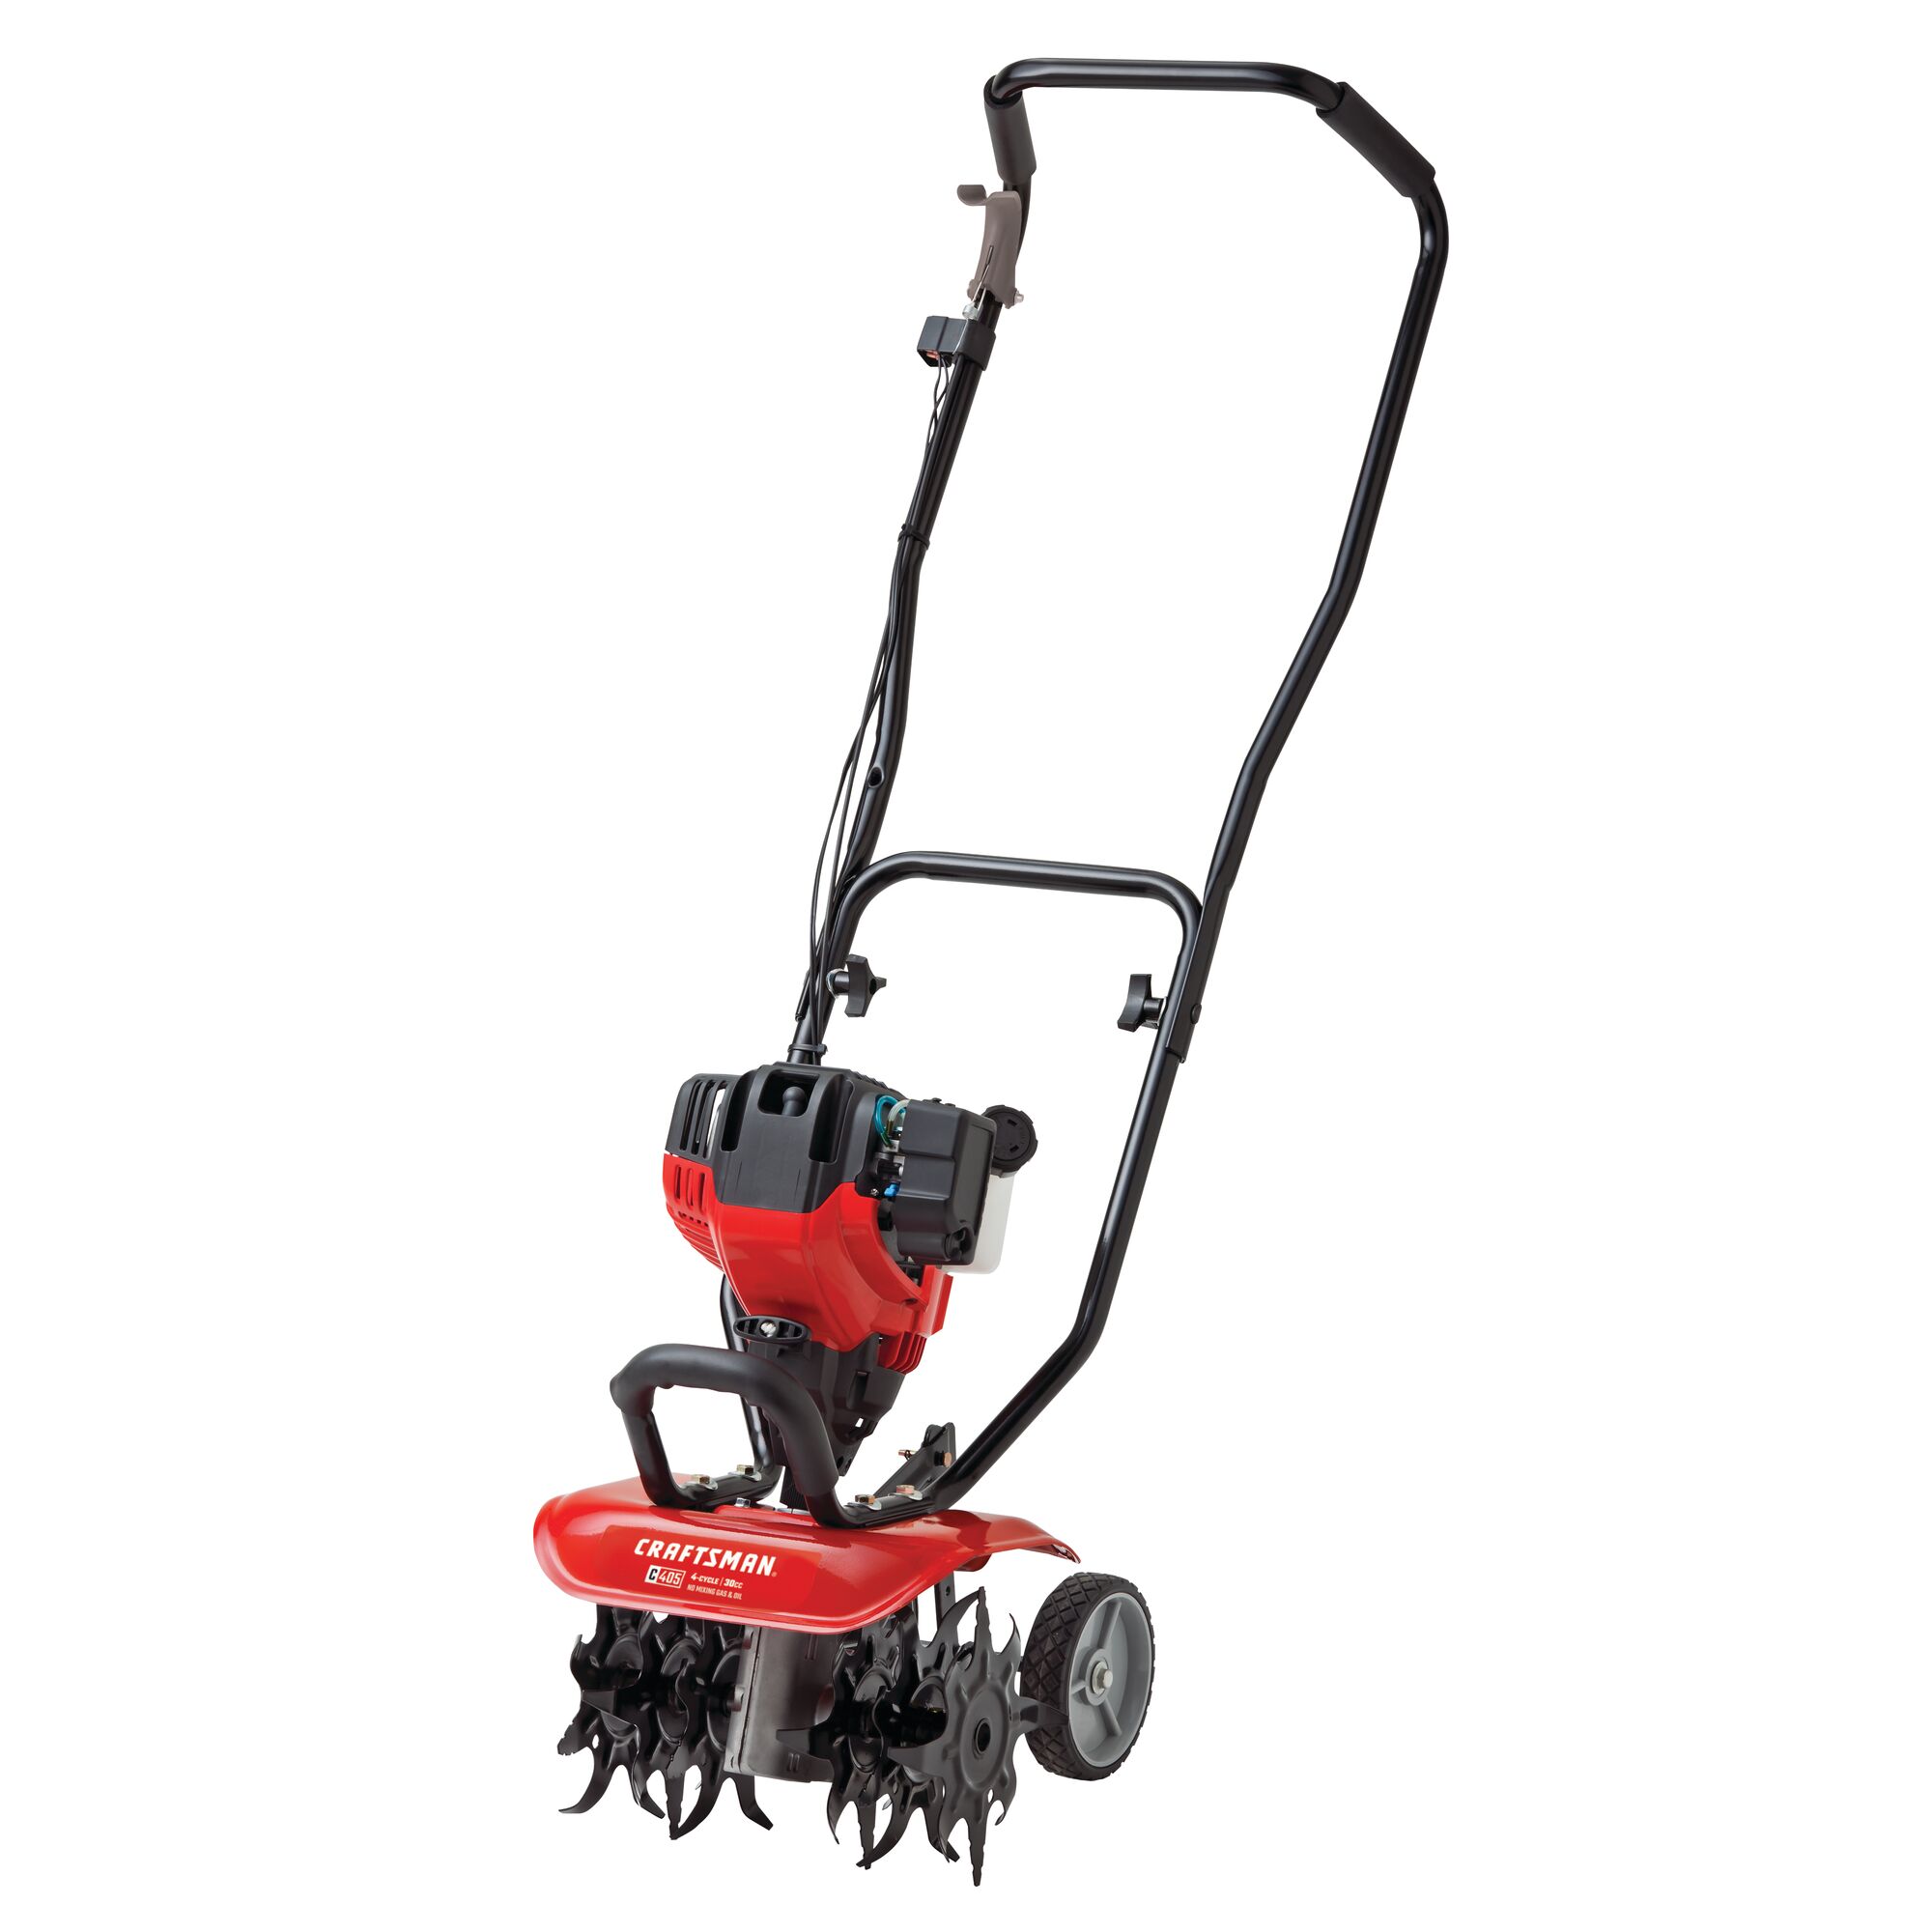 30CC 4 Cycle Gas cultivator.